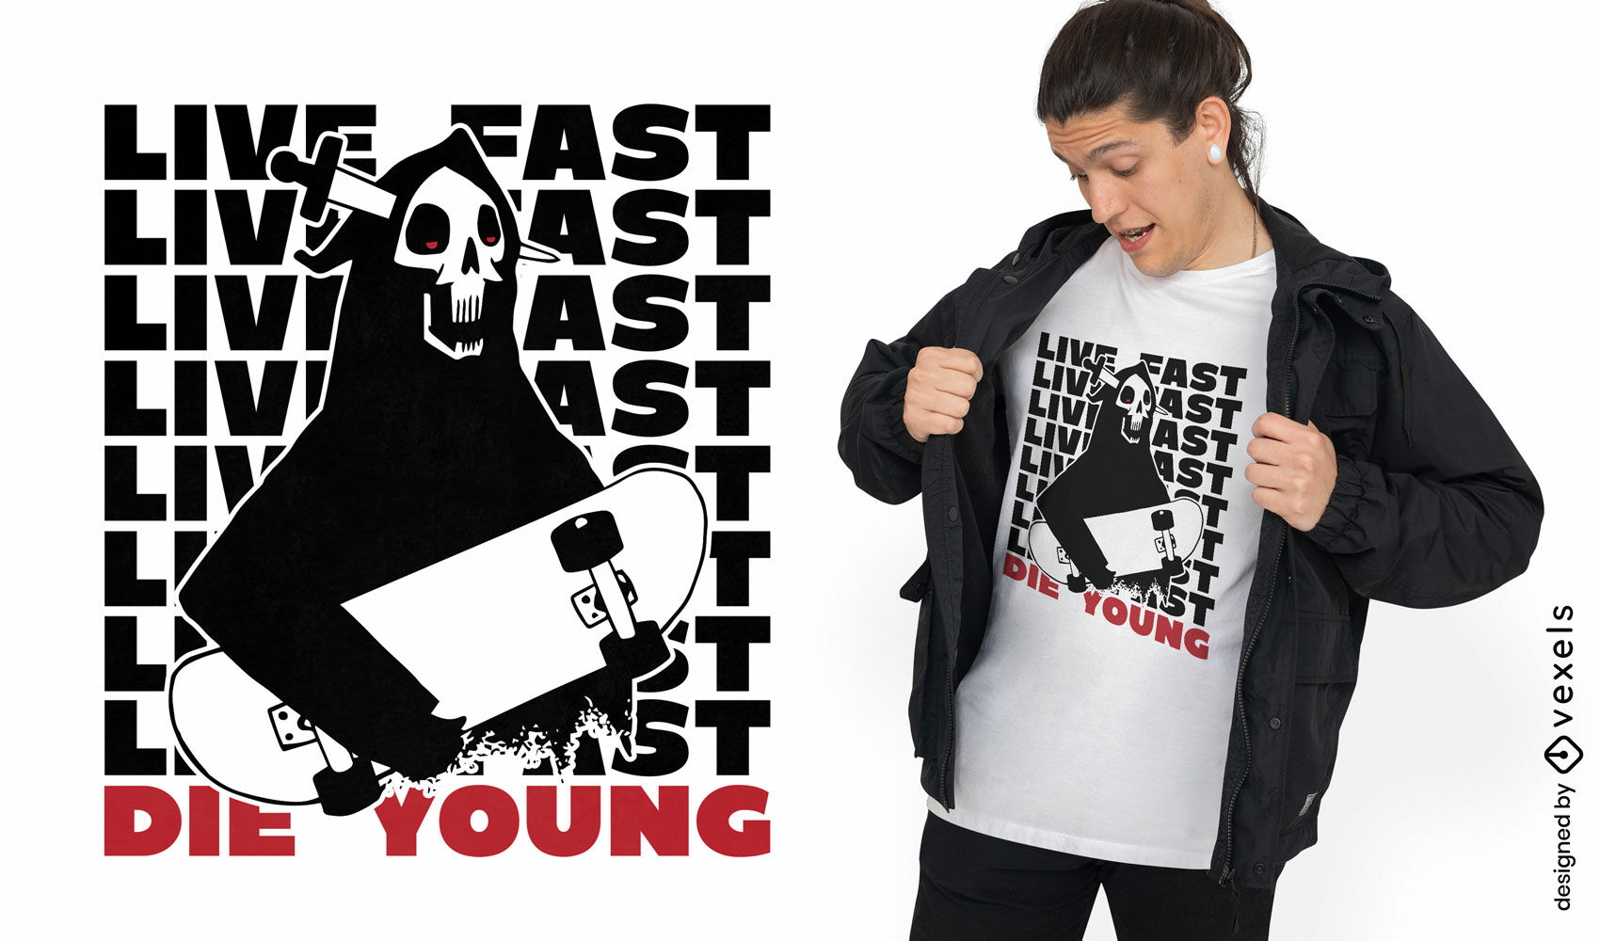 Live fast die young t-shirt design